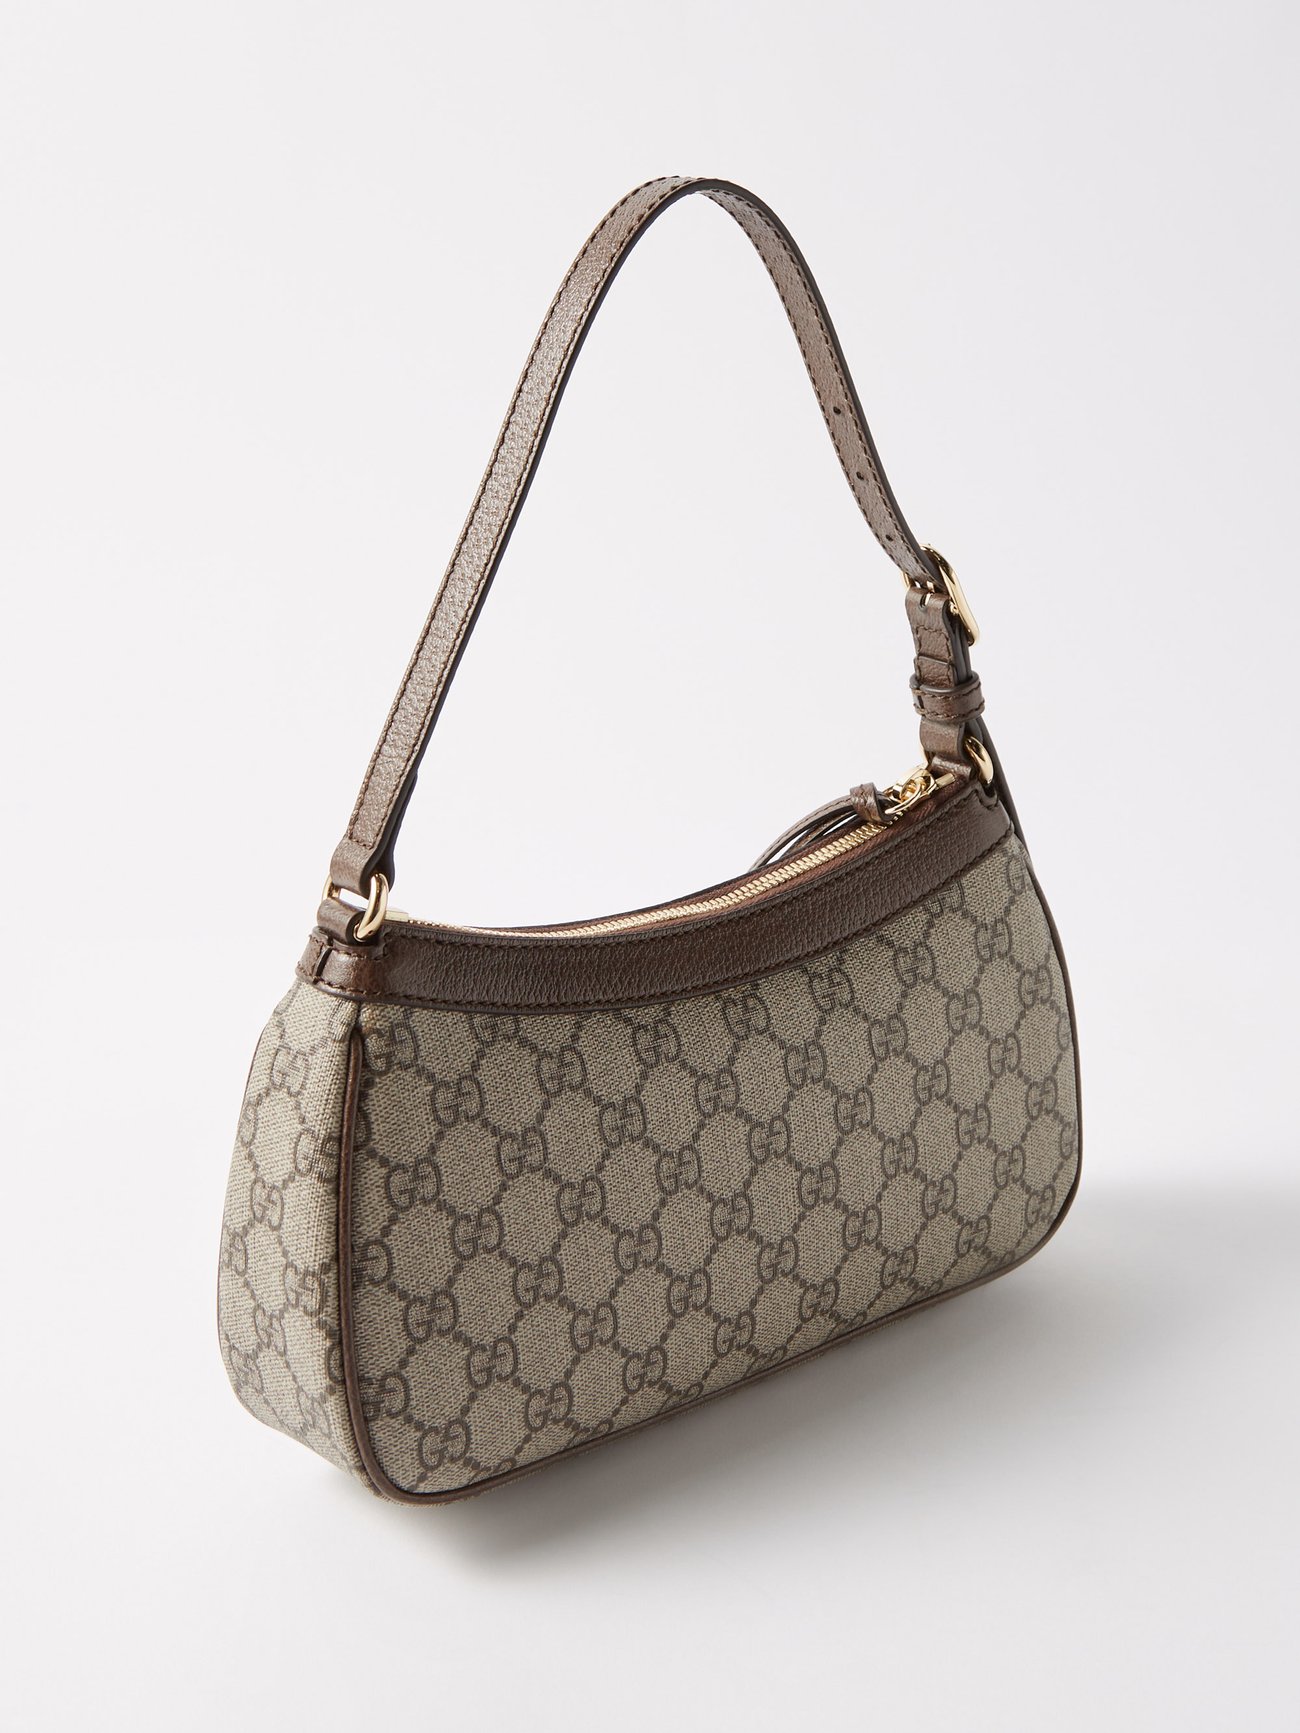 Gucci Ophidia Small GG Canvas Tote Shoulder Bag Beige